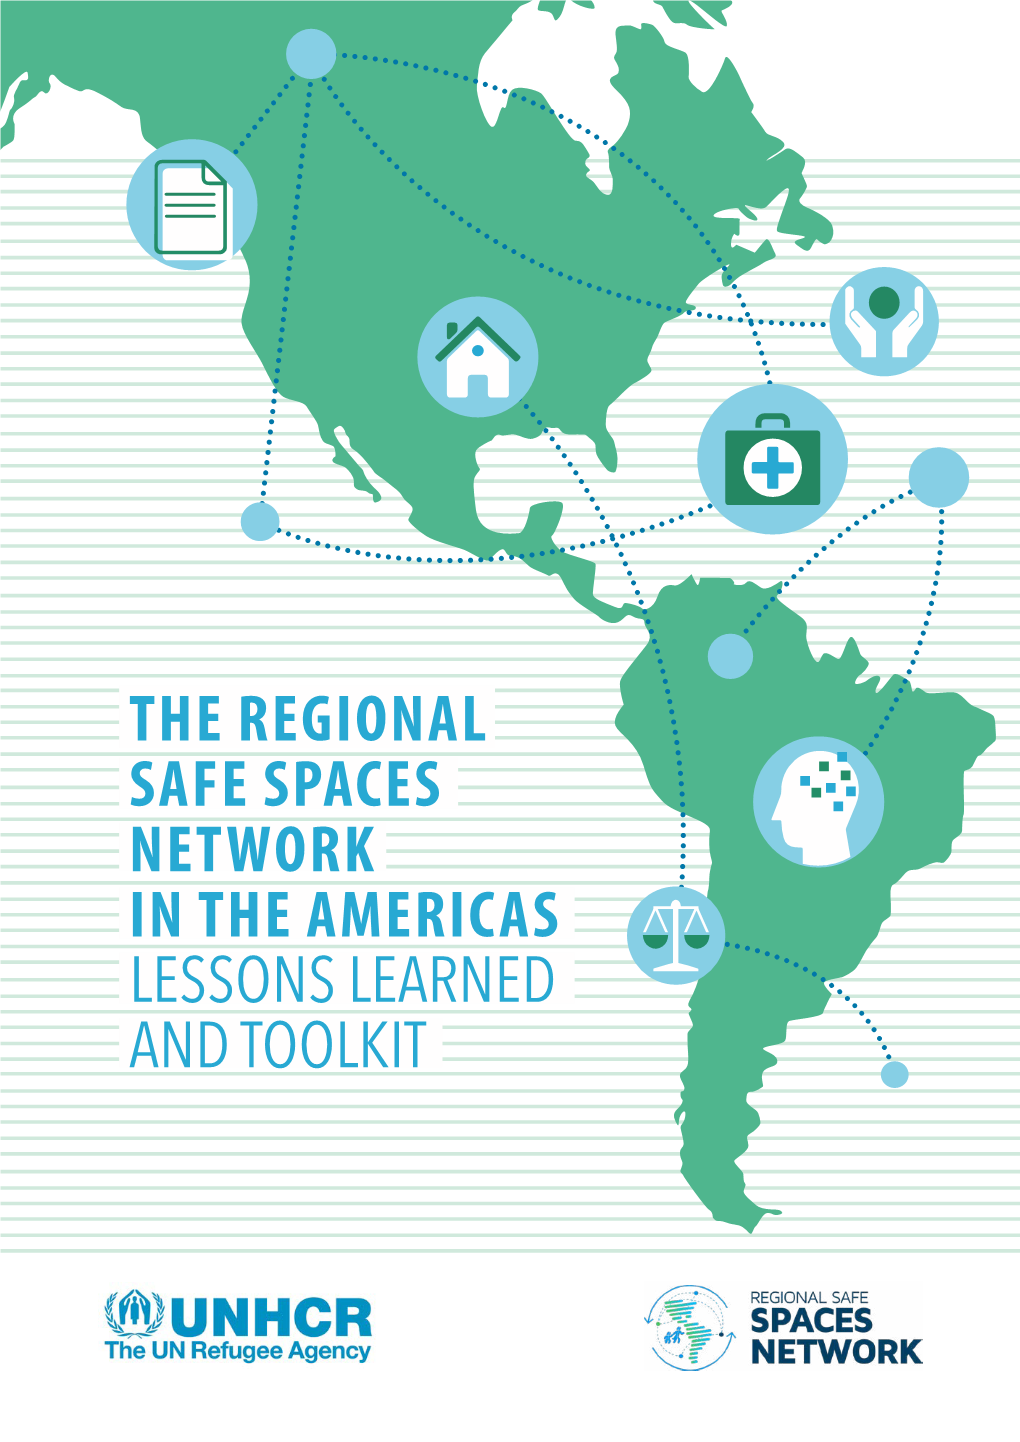 The Regional Safe Spaces Network in the Americas: Lessons Learned And